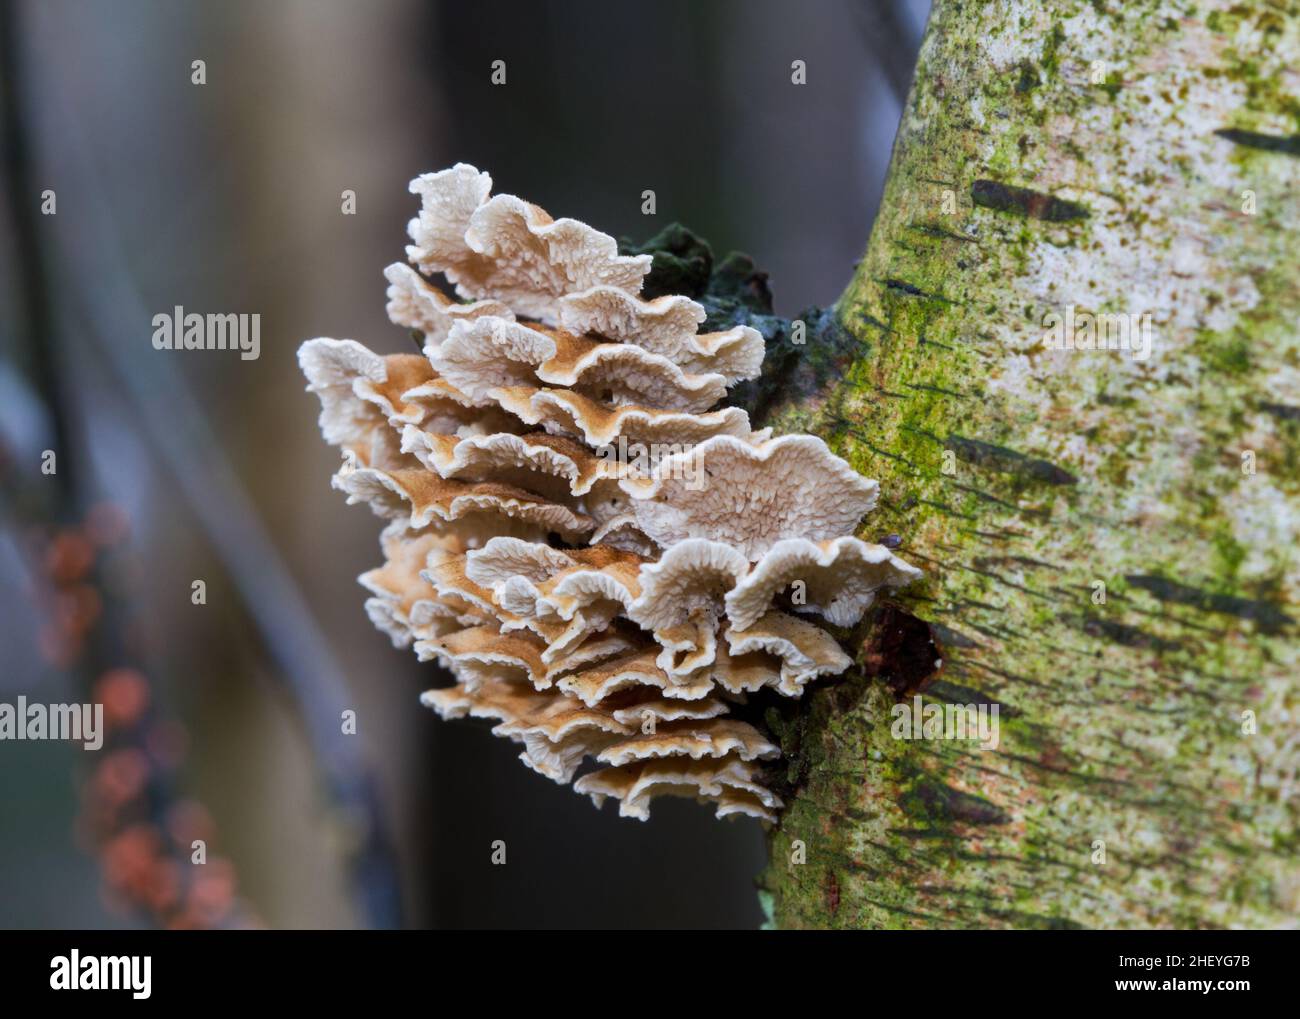 Crimped gill, small saprobic mushrooms, on the trunk of a decaying Birch Stock Photo